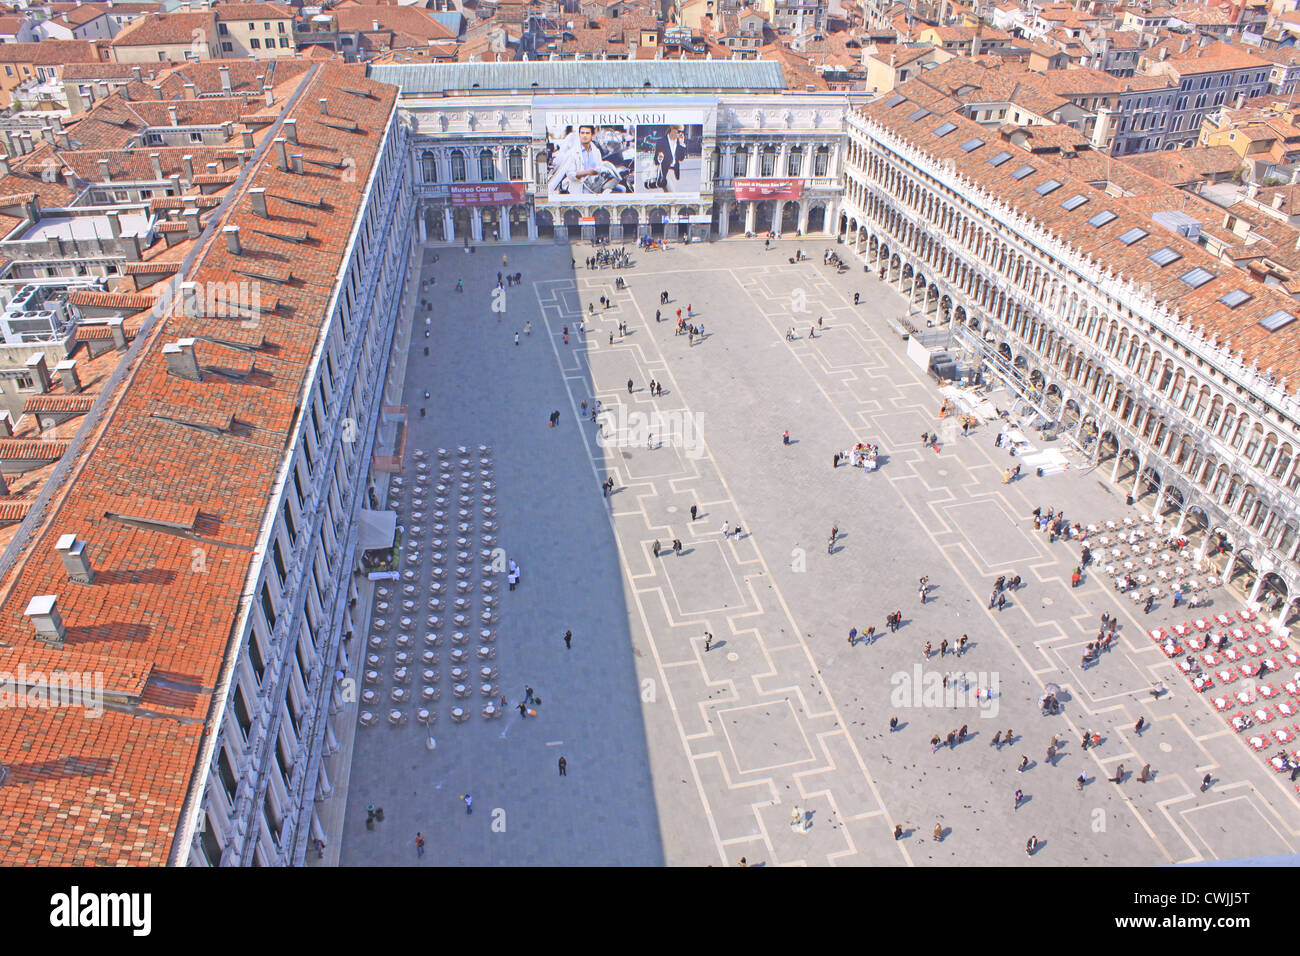 Italy. Venice. Piazza San Marco and the view of the city from a height Stock Photo